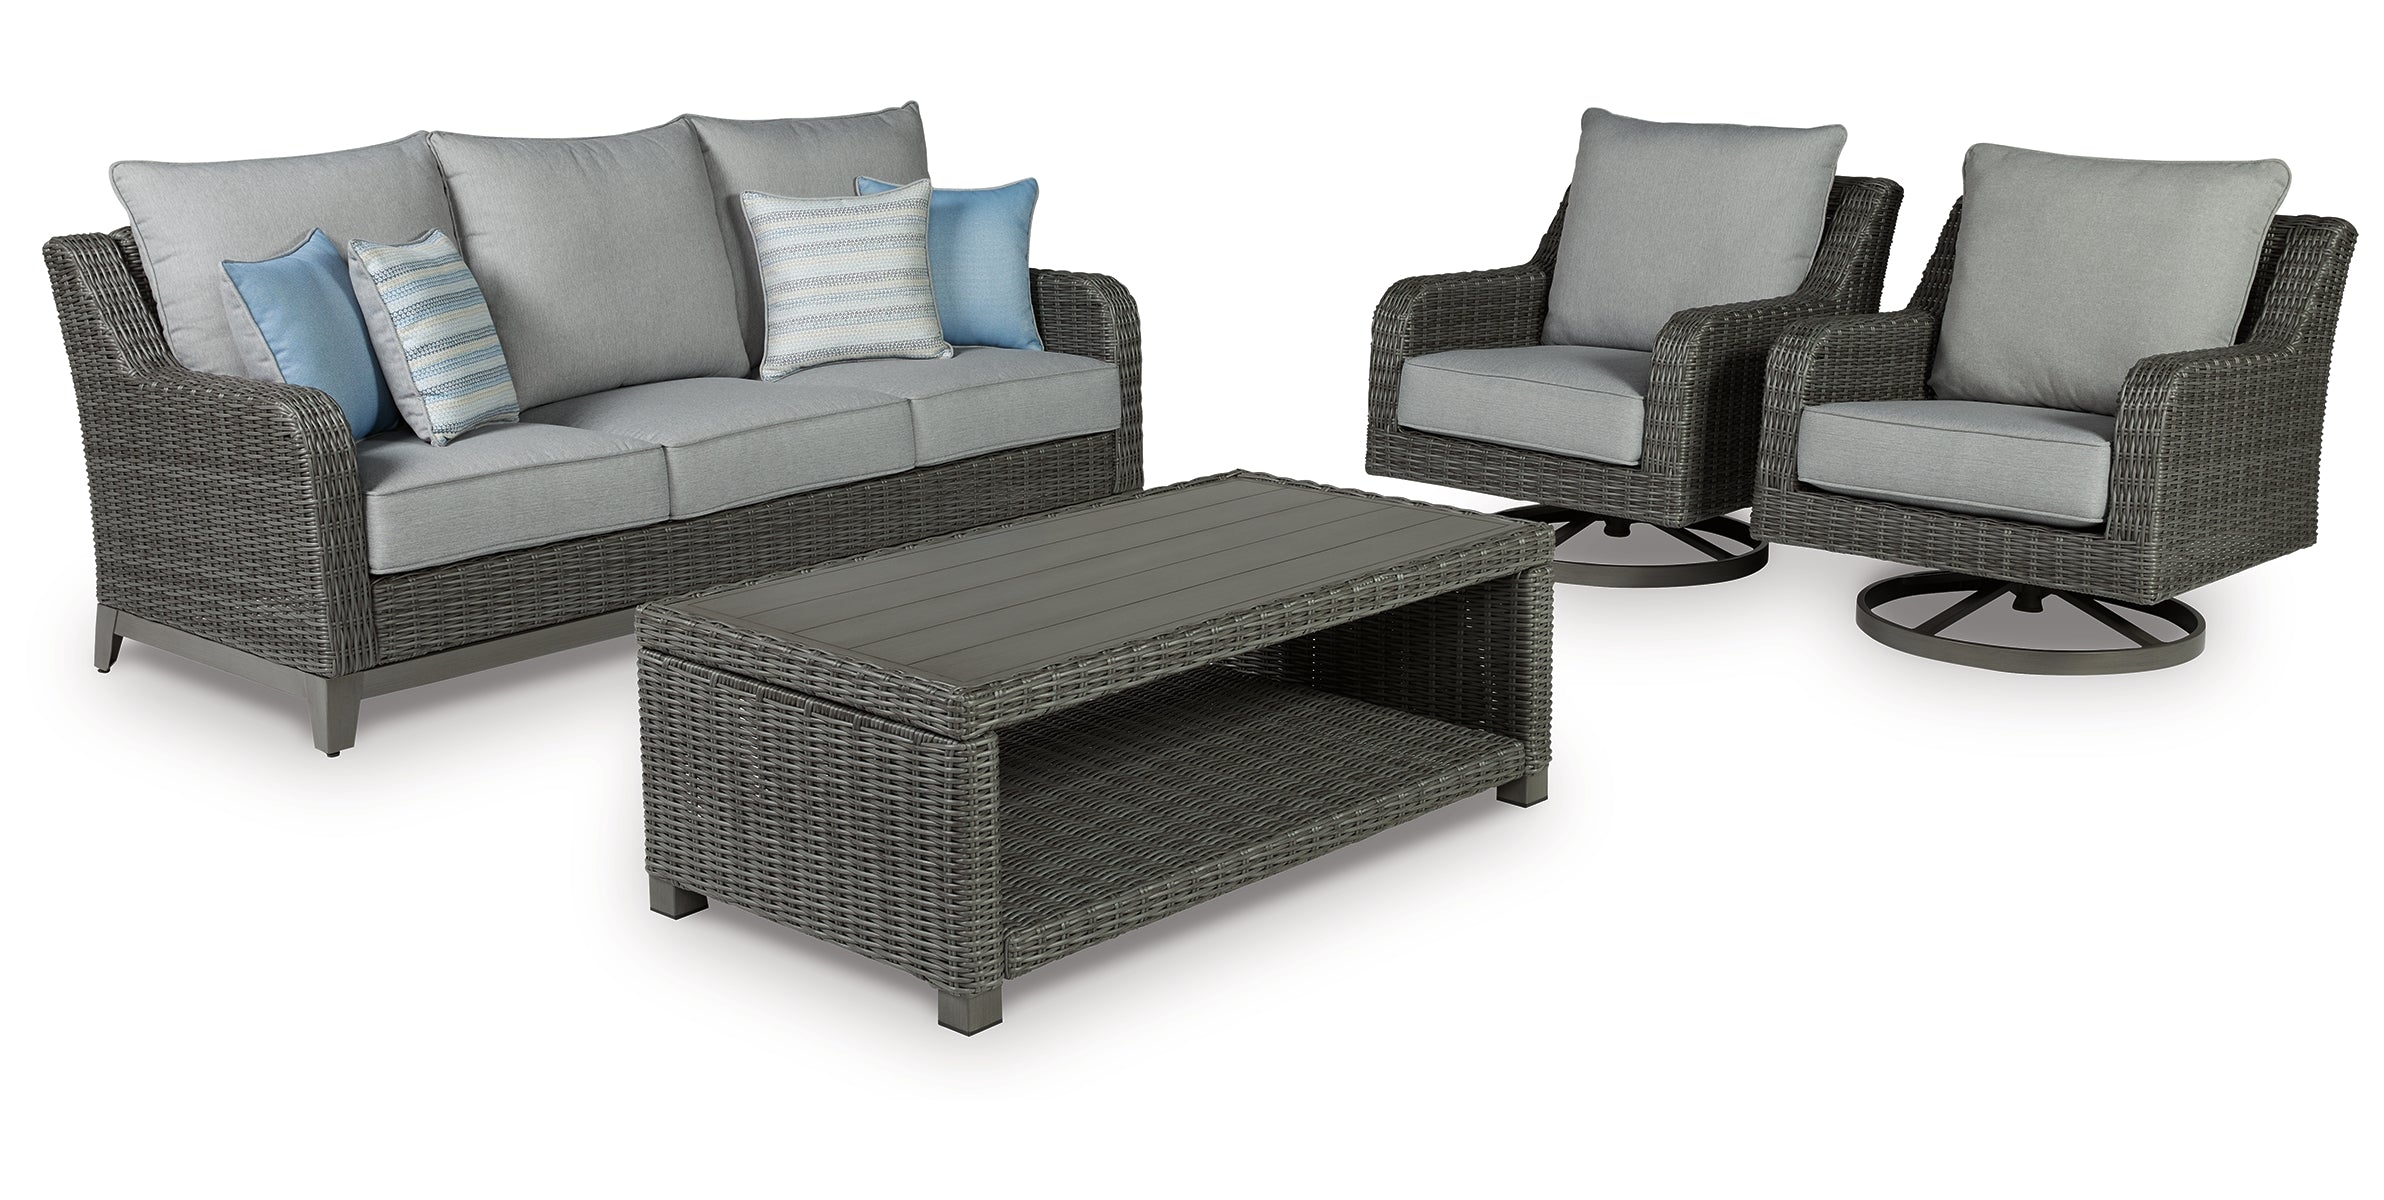 Elite Park Outdoor Sofa and 2 Chairs with Coffee Table